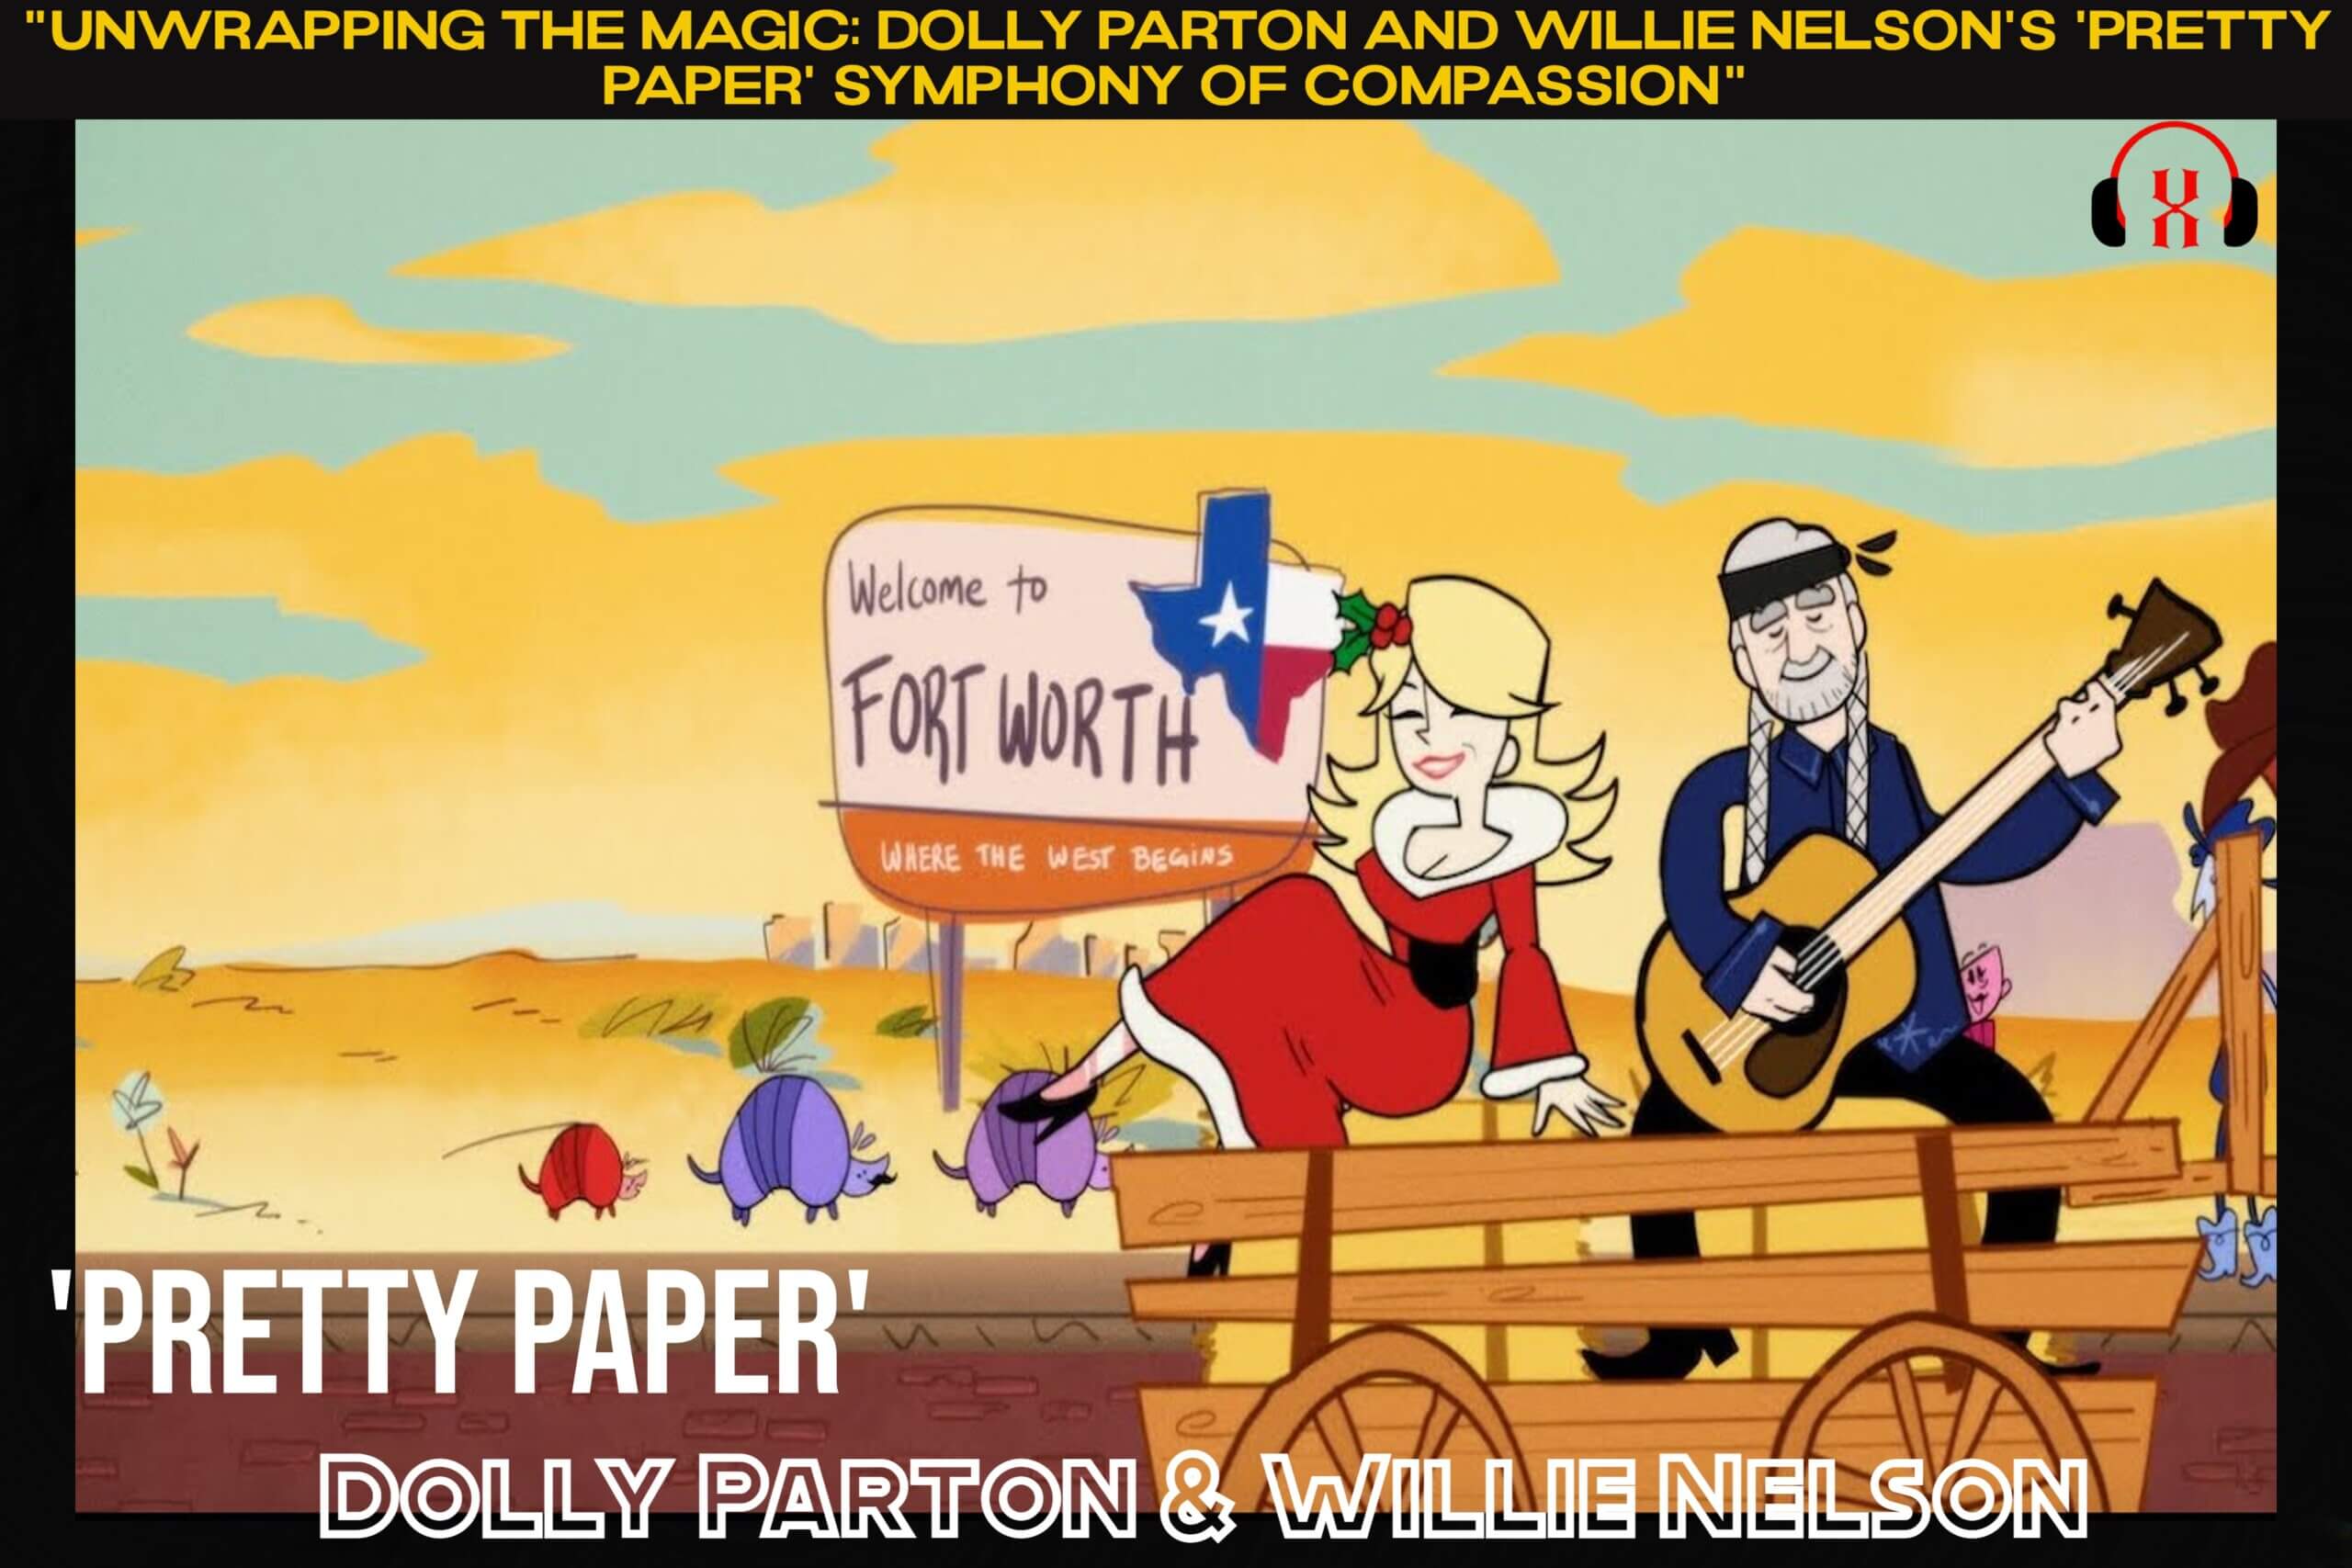 “Unwrapping the Magic: Dolly Parton and Willie Nelson’s ‘Pretty Paper’ Symphony of Compassion”